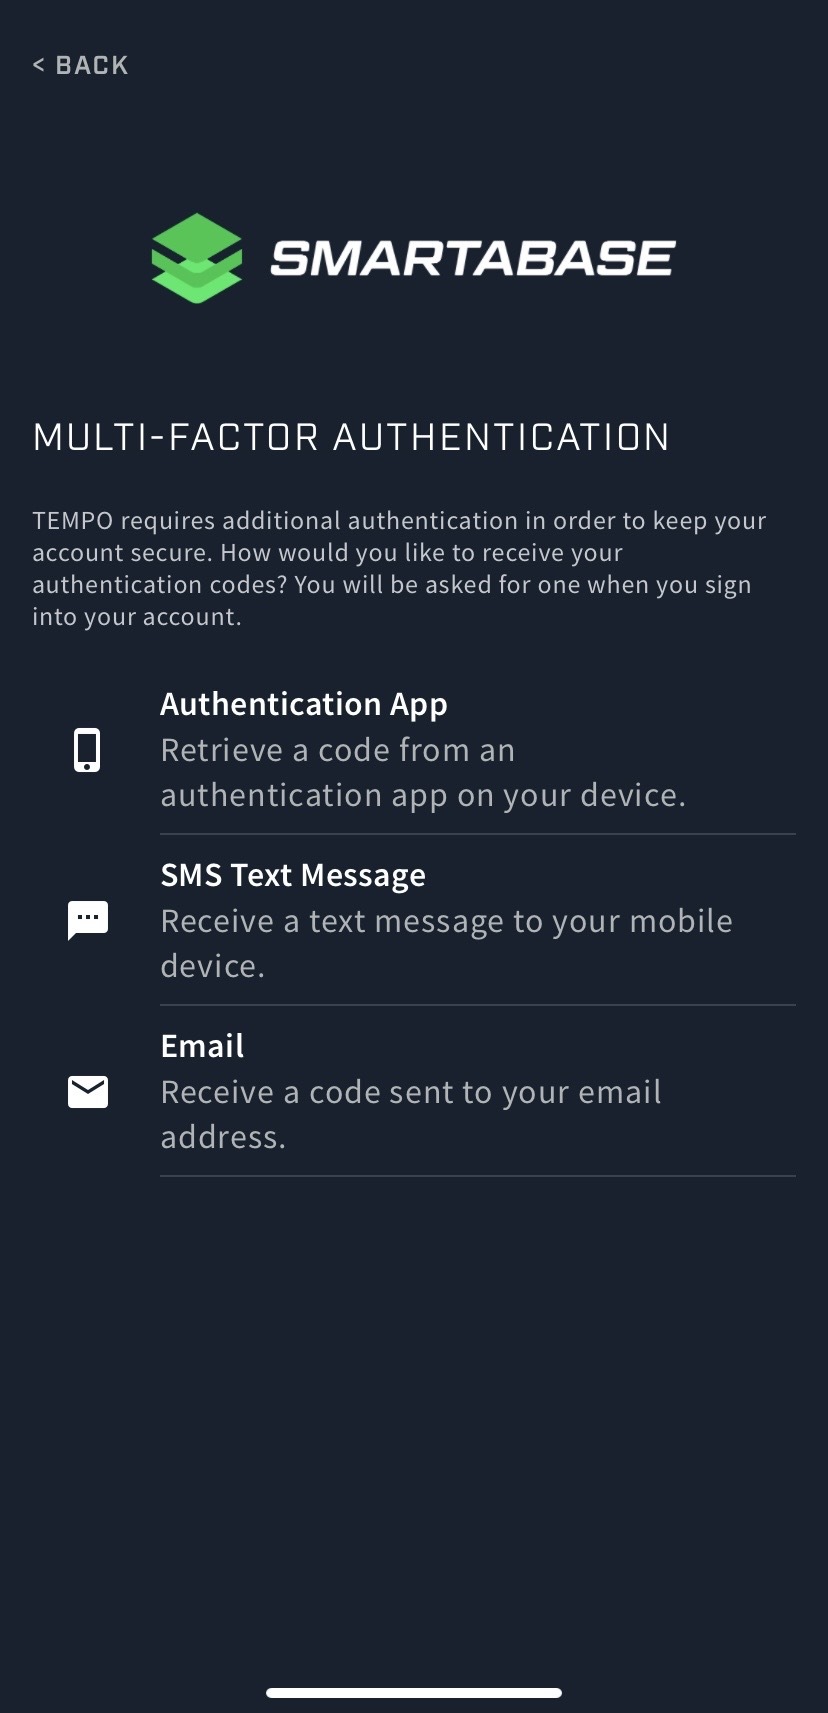 A screenshot of the multi-factor authentication preferences shown during configuration.